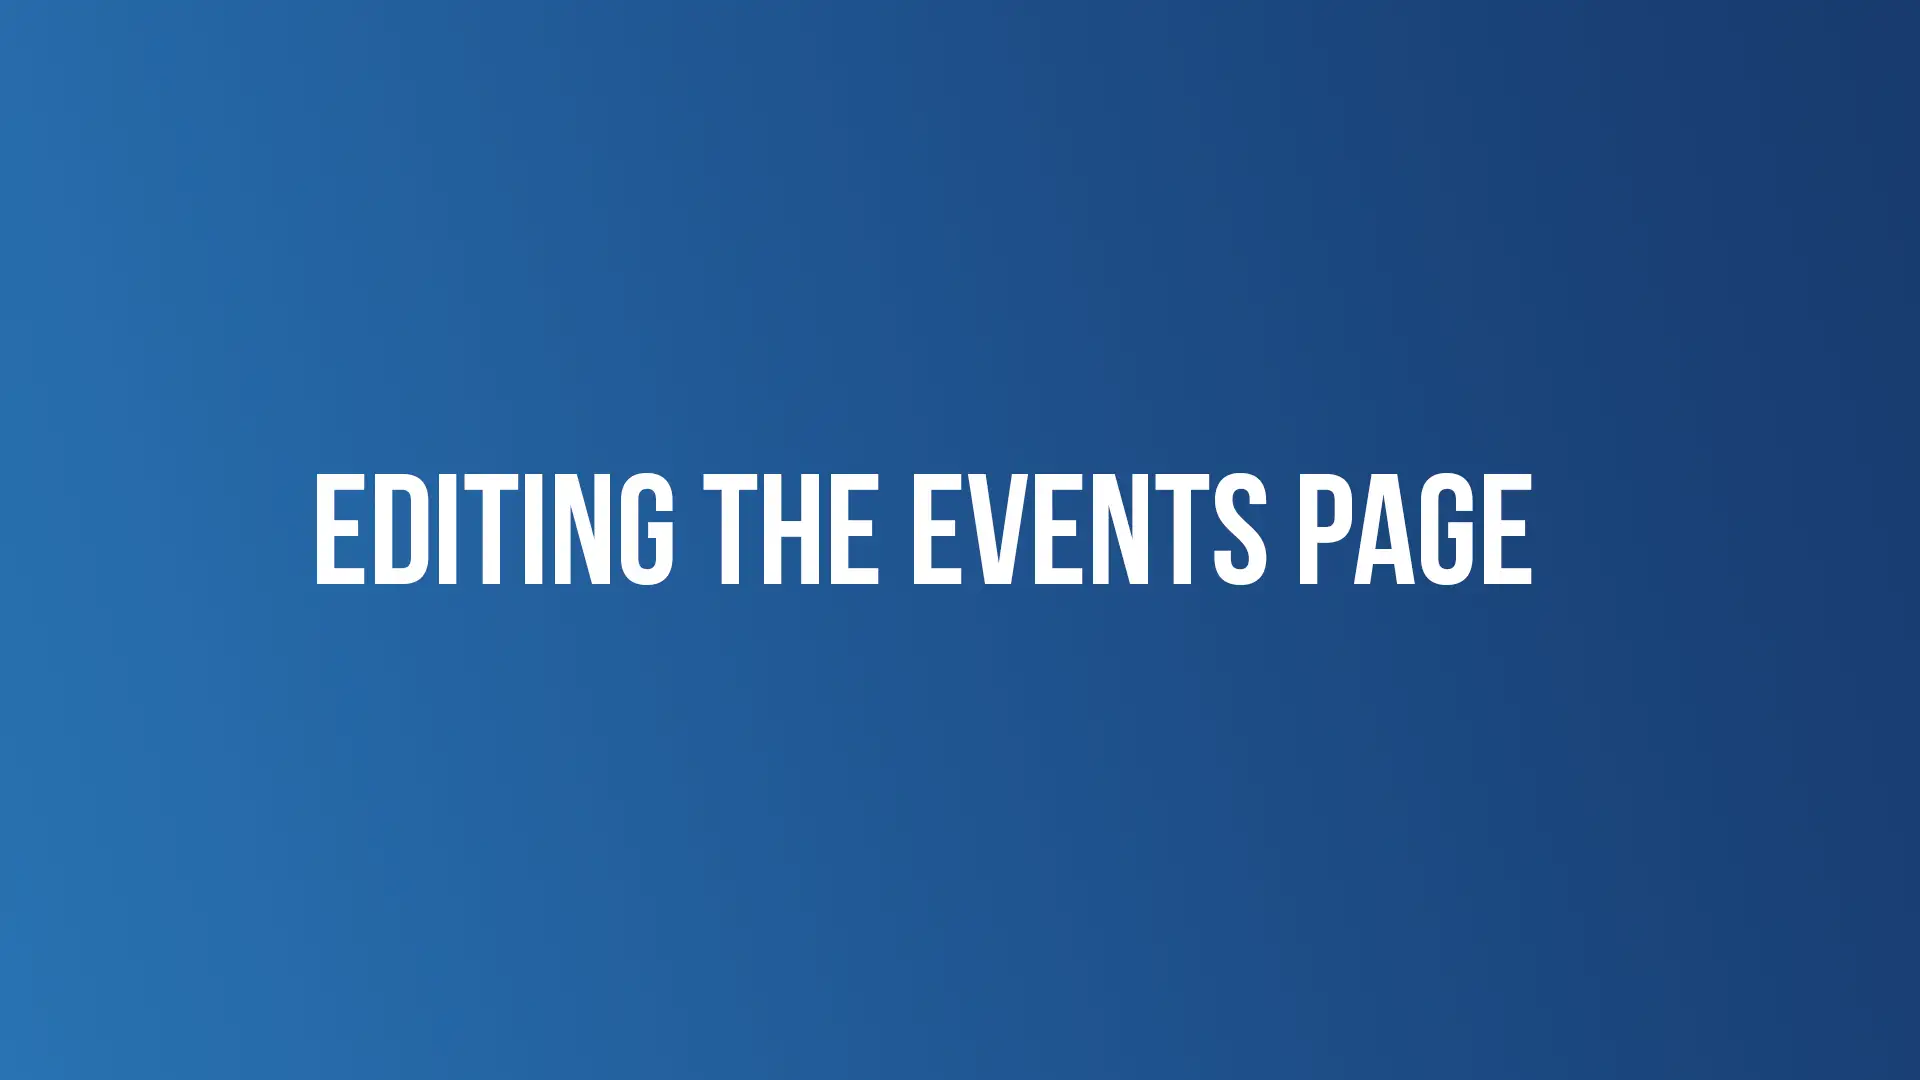 Featured image for “Editing the Events Page”